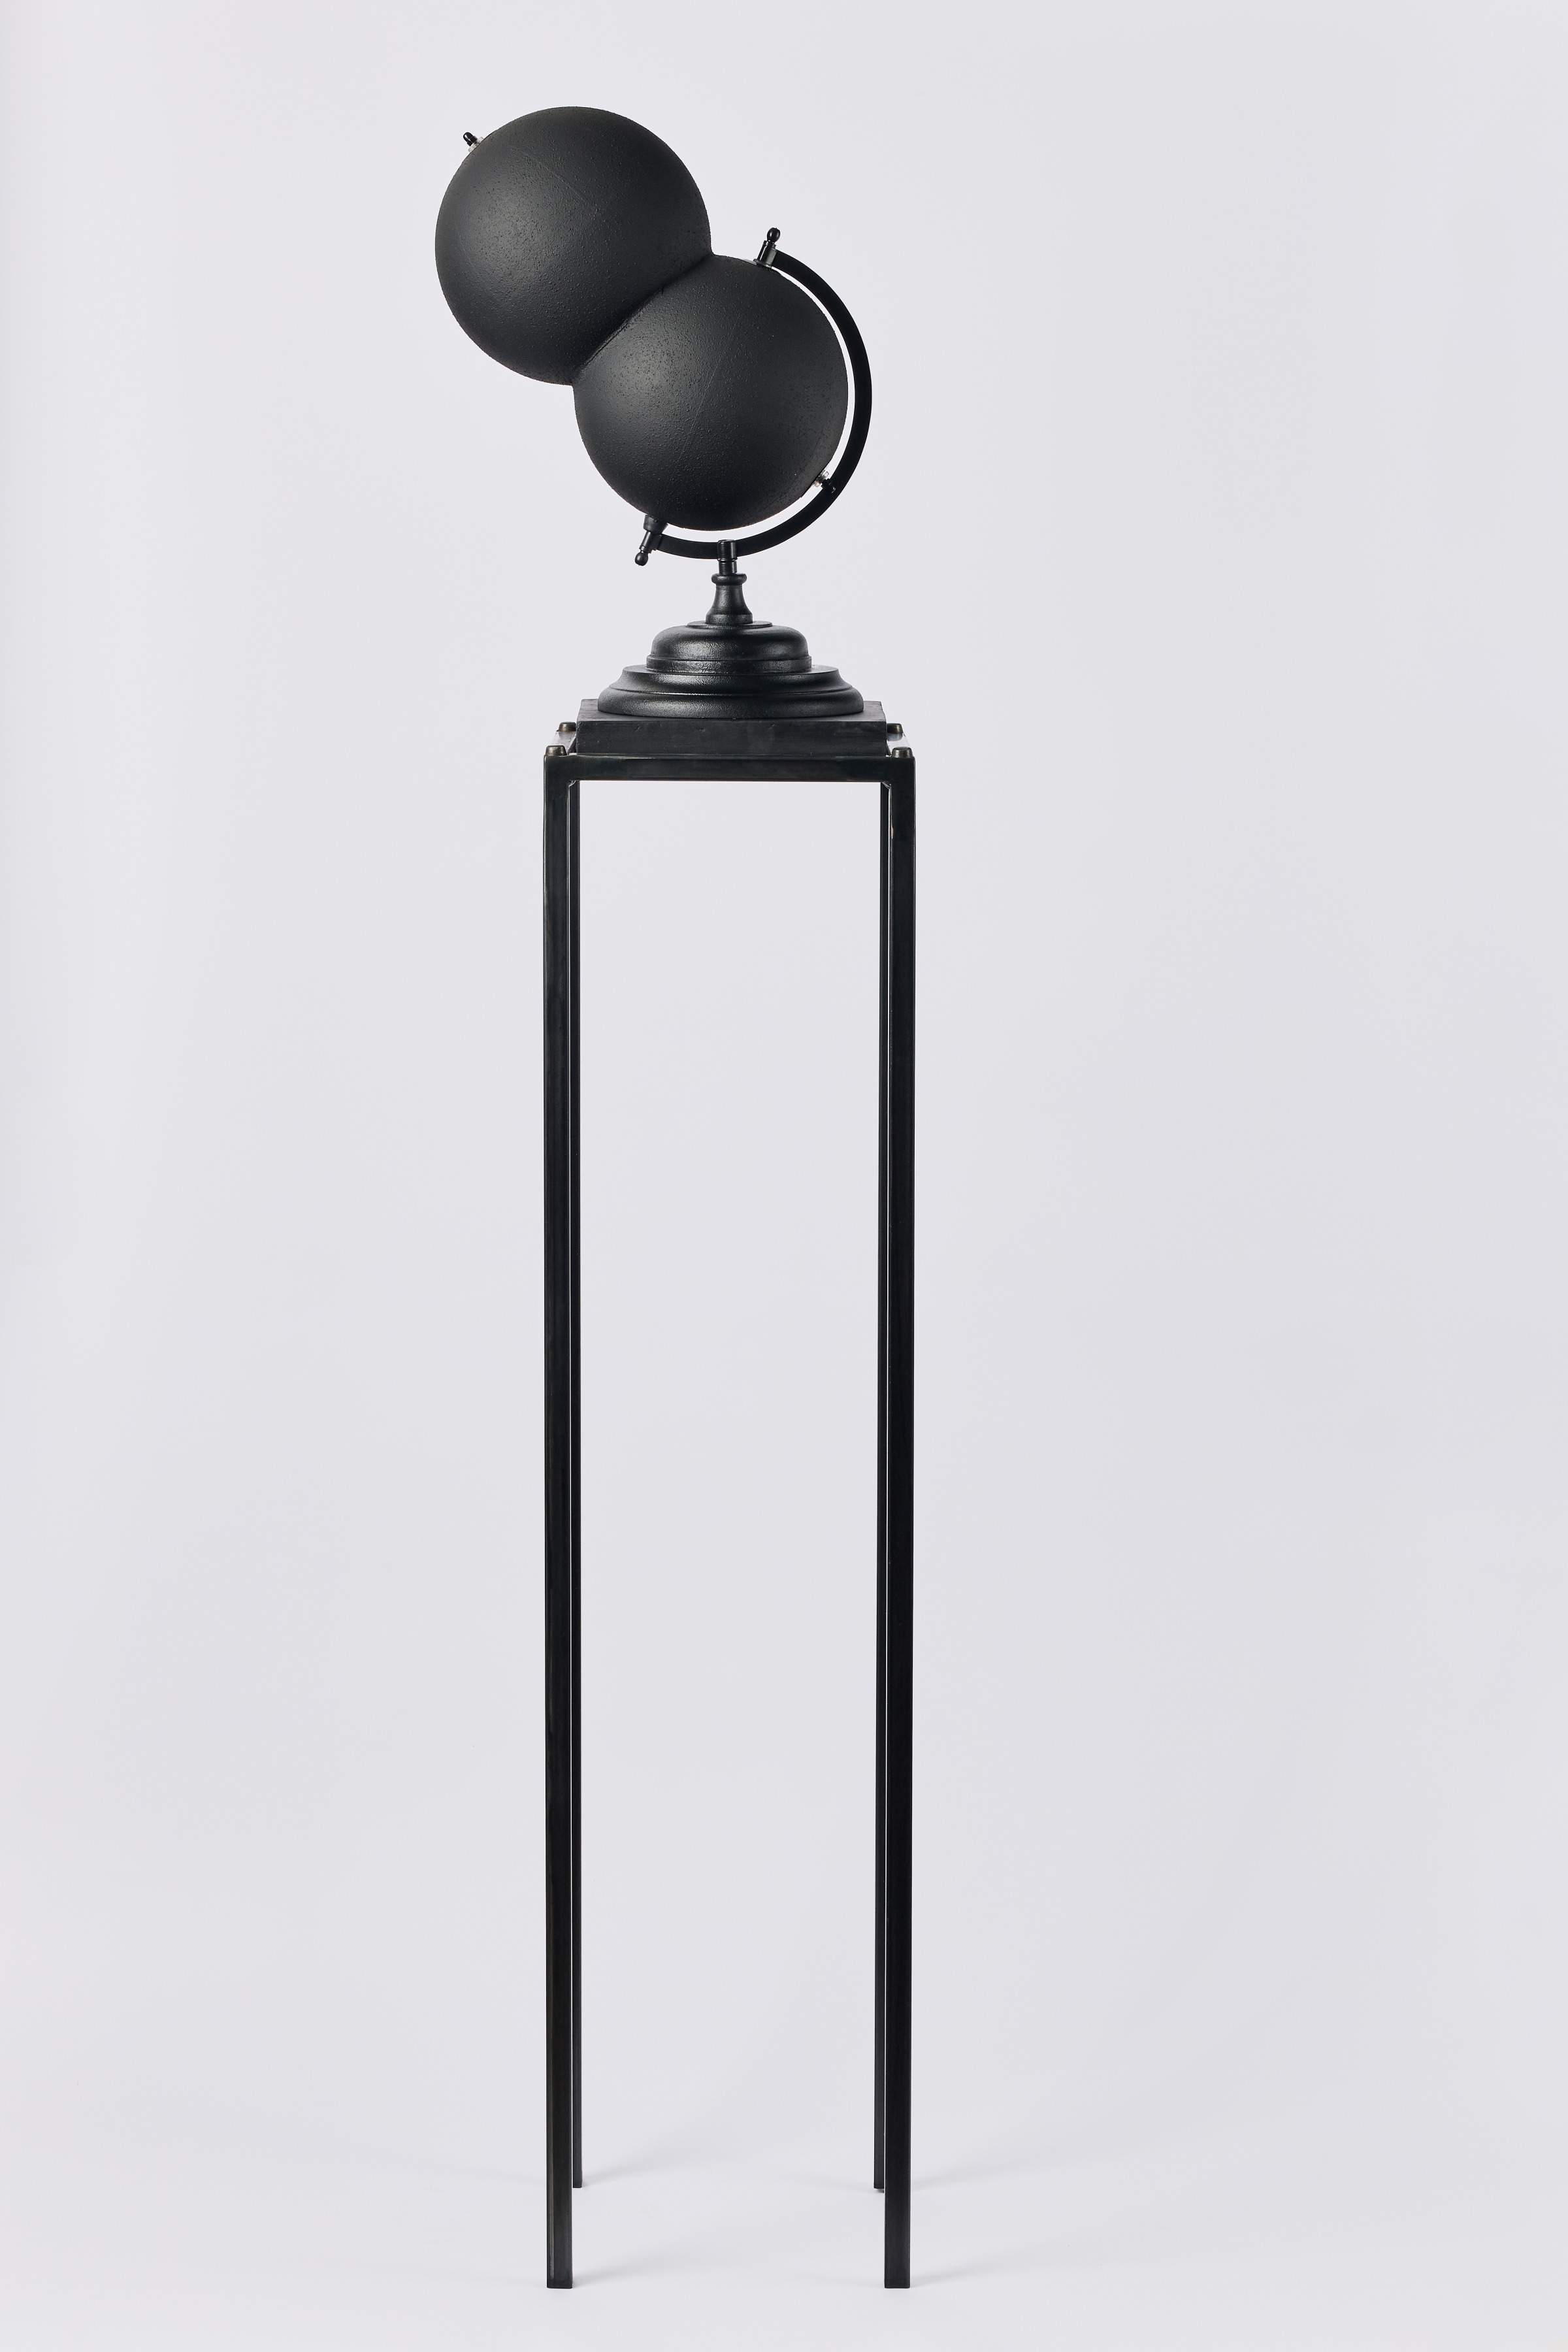 binary model (after Public Enemy)

2021

altered PET plastic globe model, synthetic stone finish and black primer with welded steel, spent charcoal and gypsum base

162 x 28 x 28 cm

sales enquiries